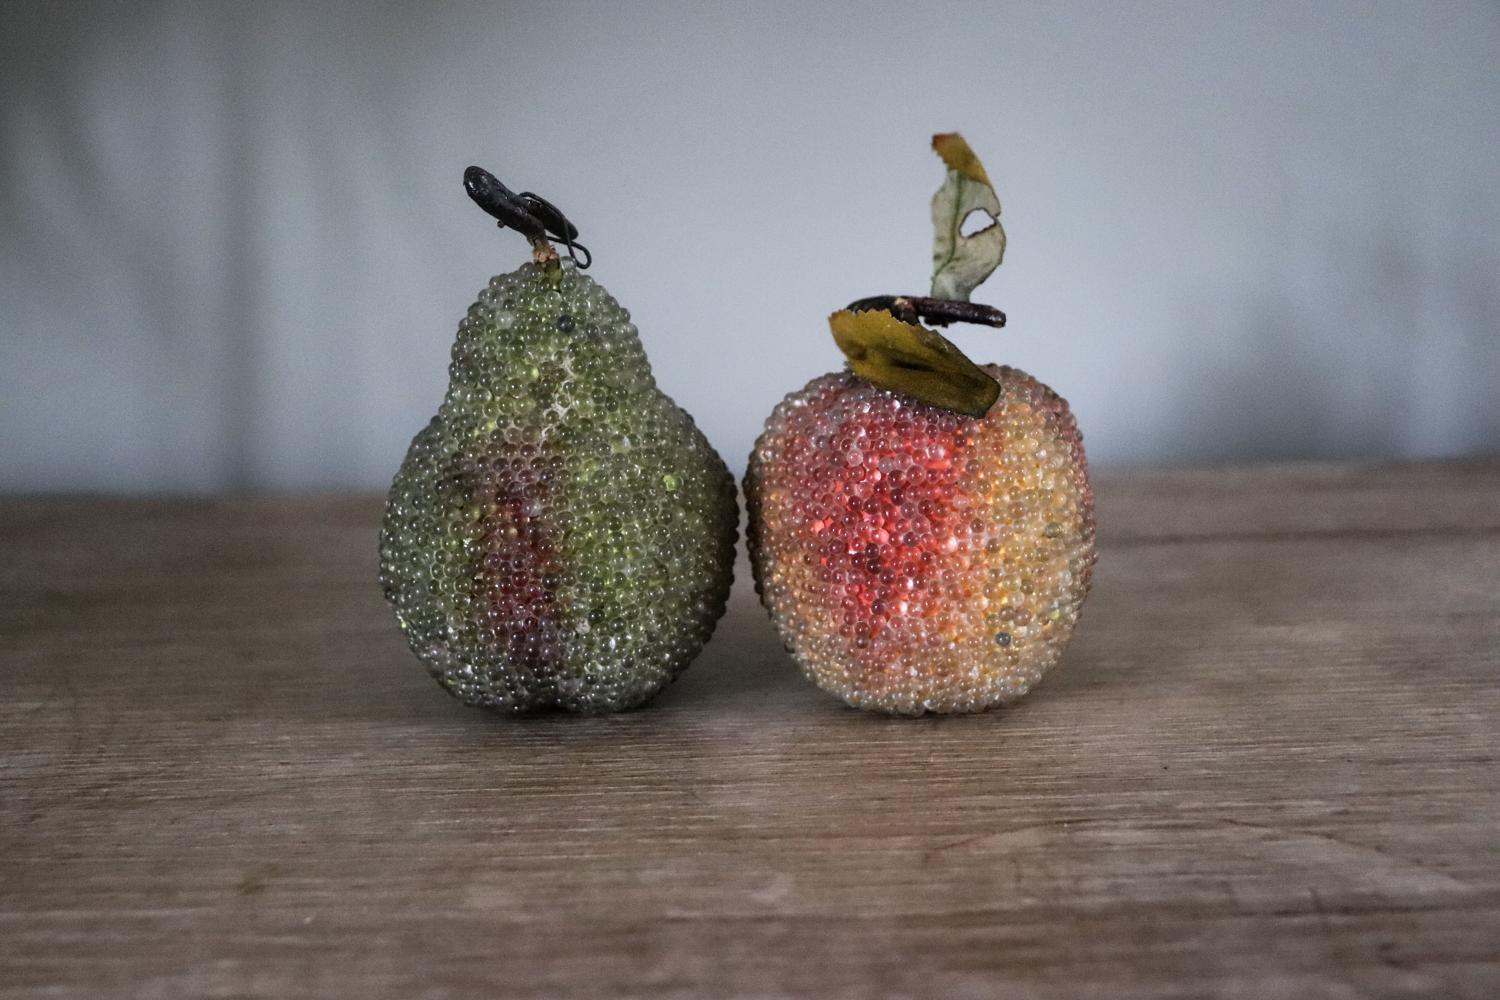 'Sparkly' apple and pear